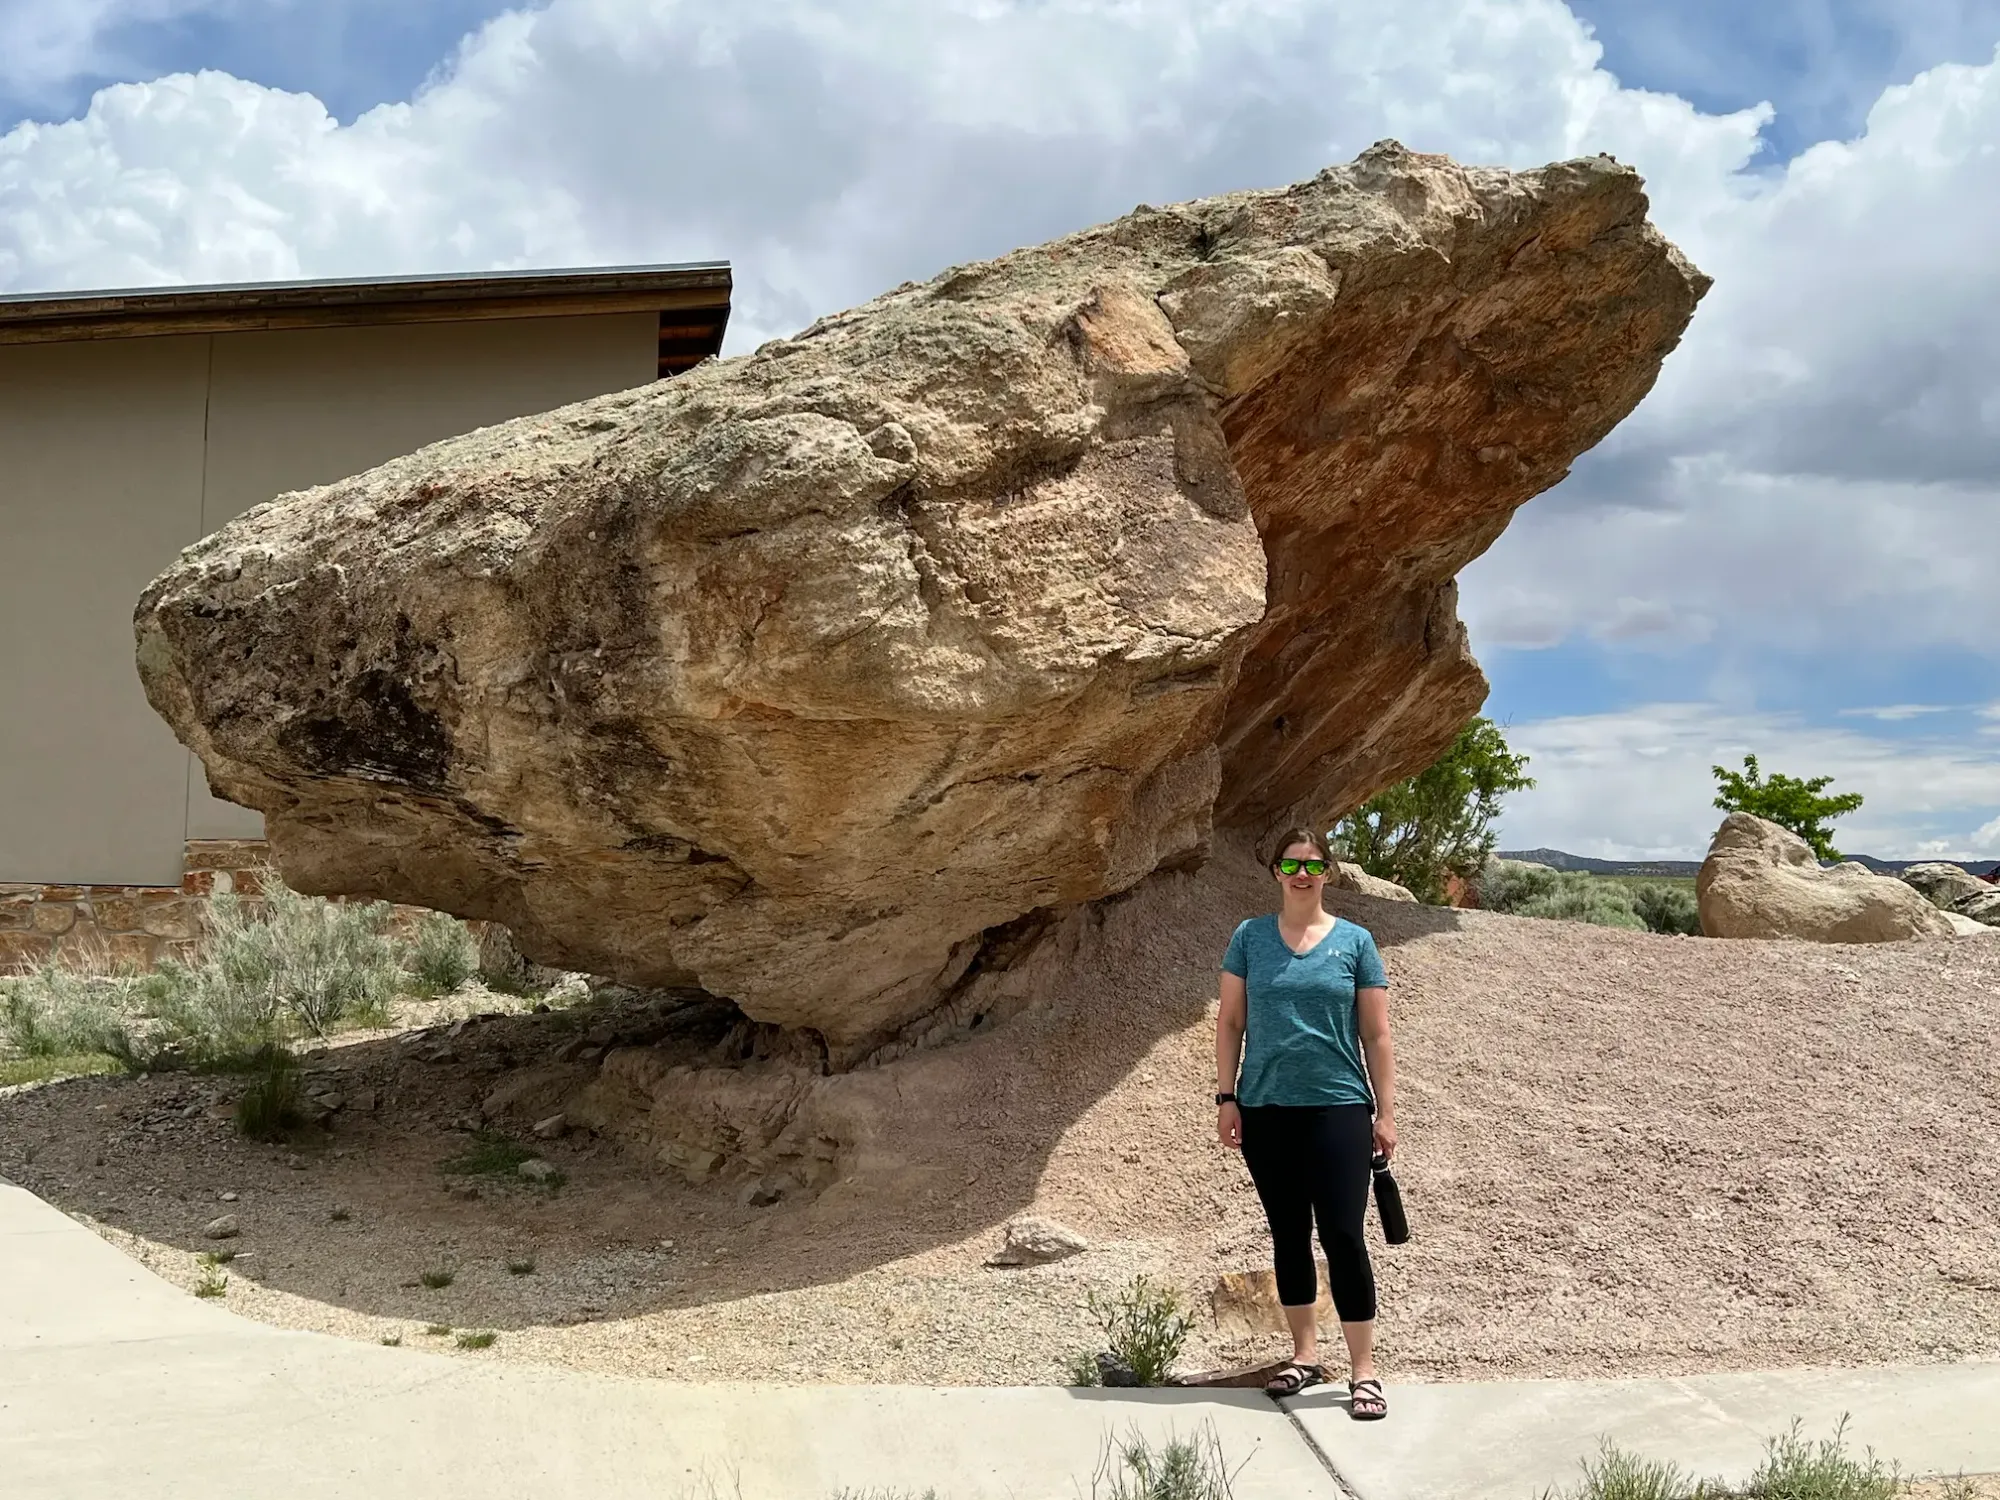 Lindsey is standing in front of a massive boulder at the Cleveland Lloyd Dinosaur Quarry.